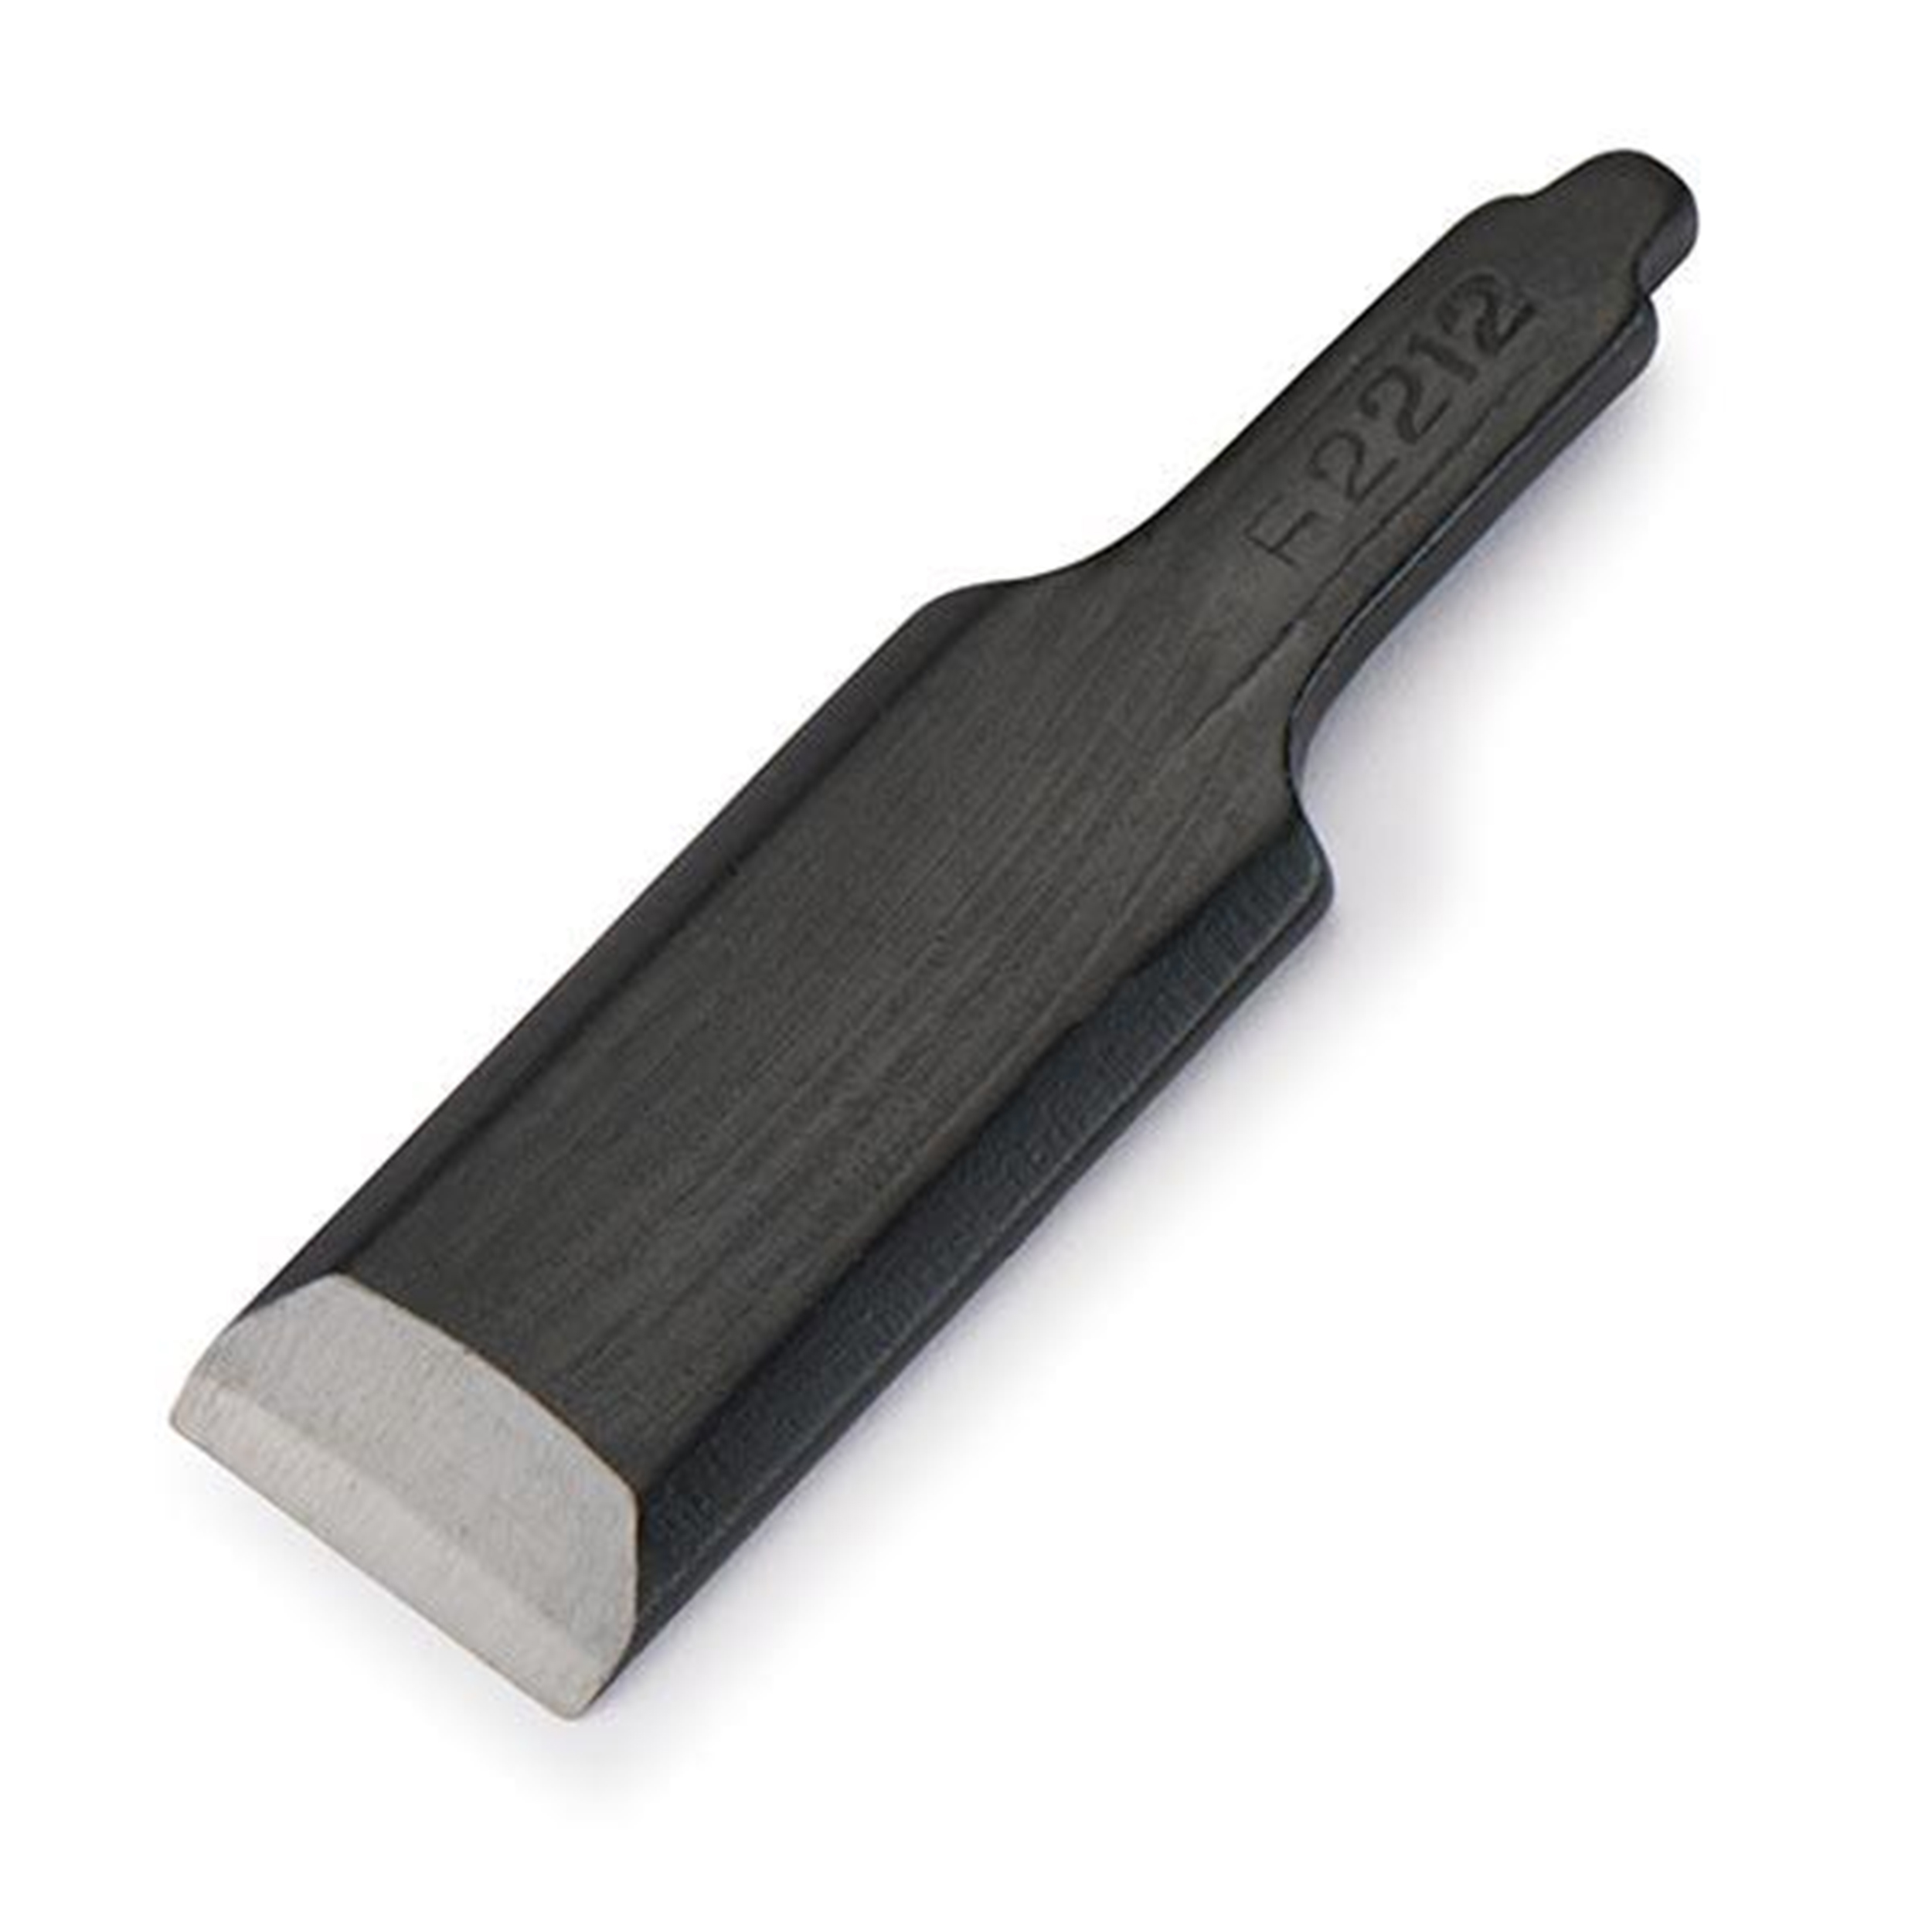 Flat 12mm Blade For Hct-30a Power Carver - Automach